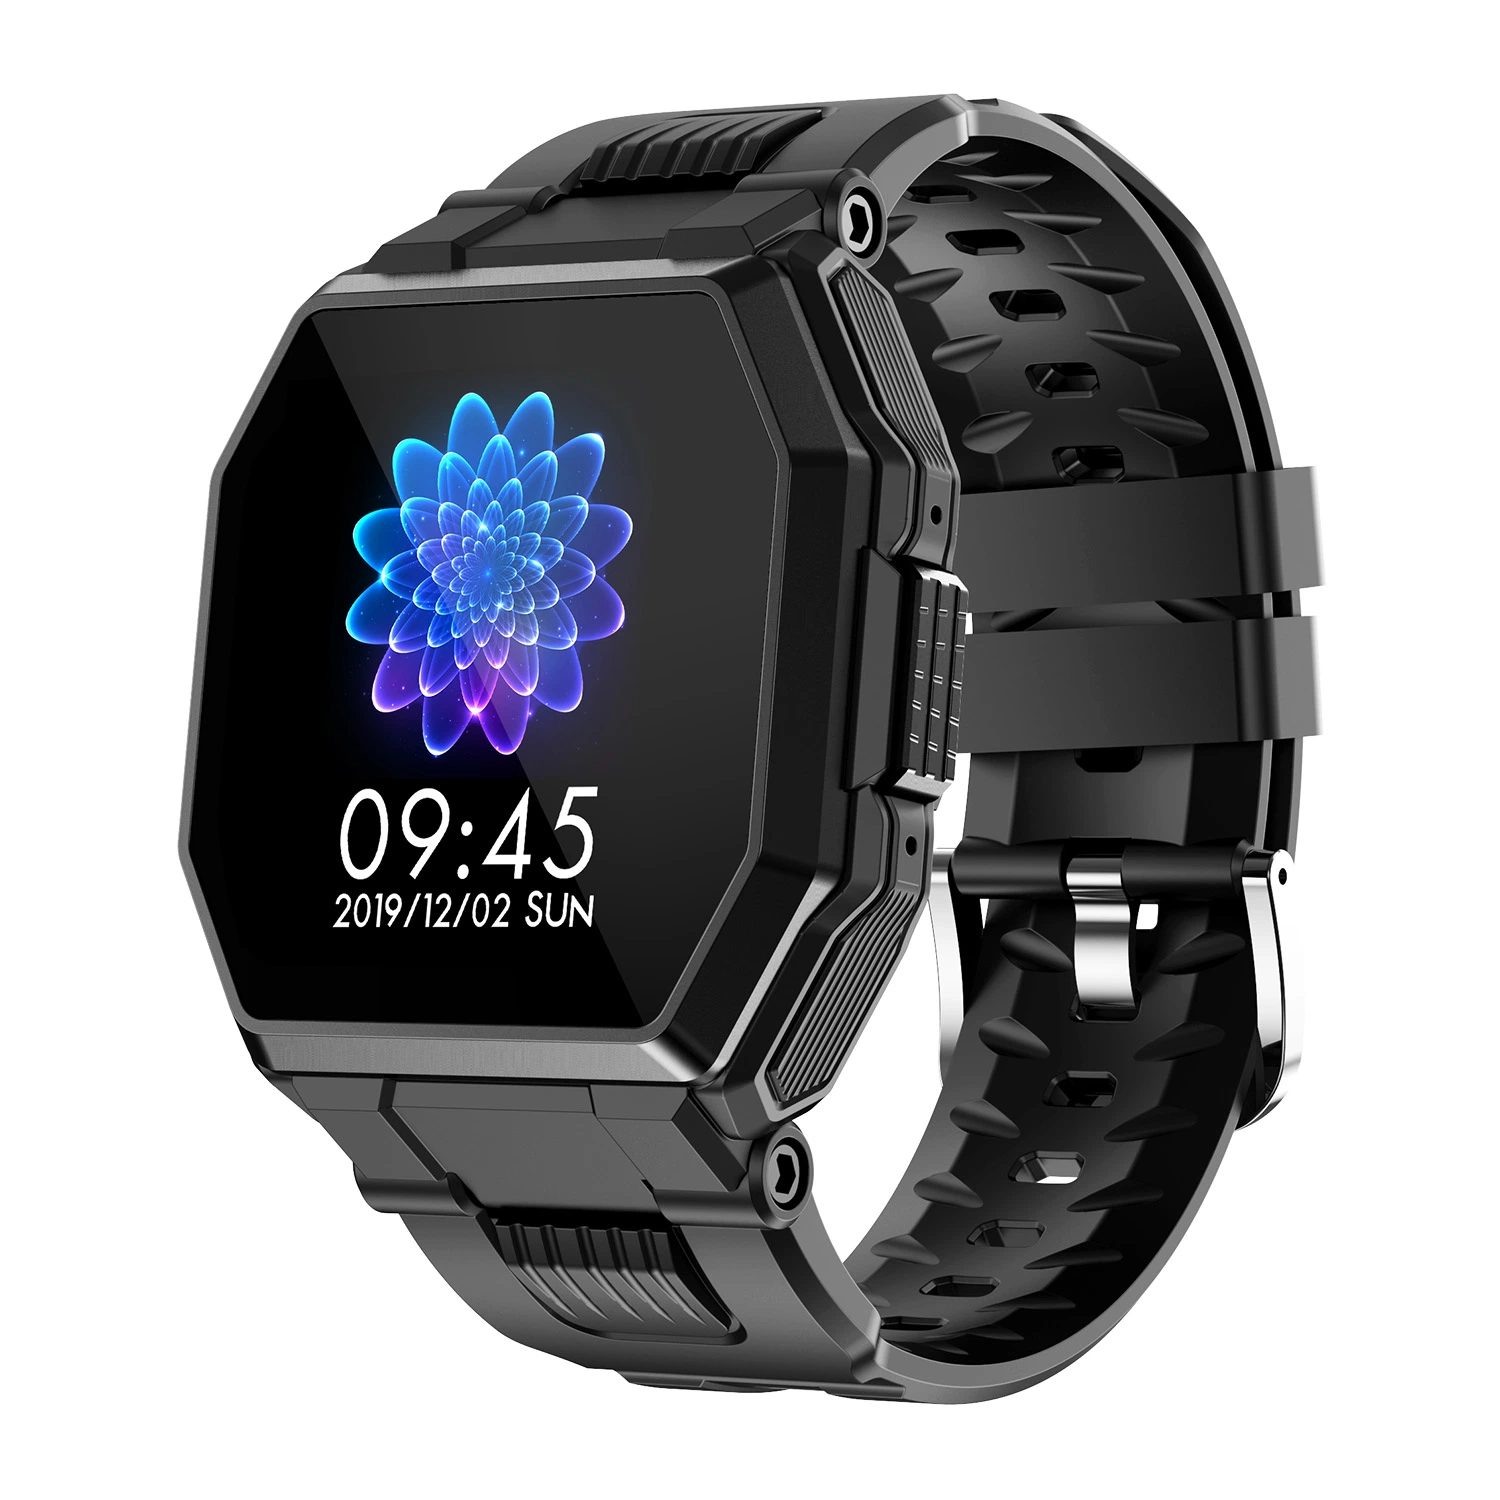 New Arrival S9 Sport Smart Mobile Phone Watch Bluetooth Smartwatch Smartphone